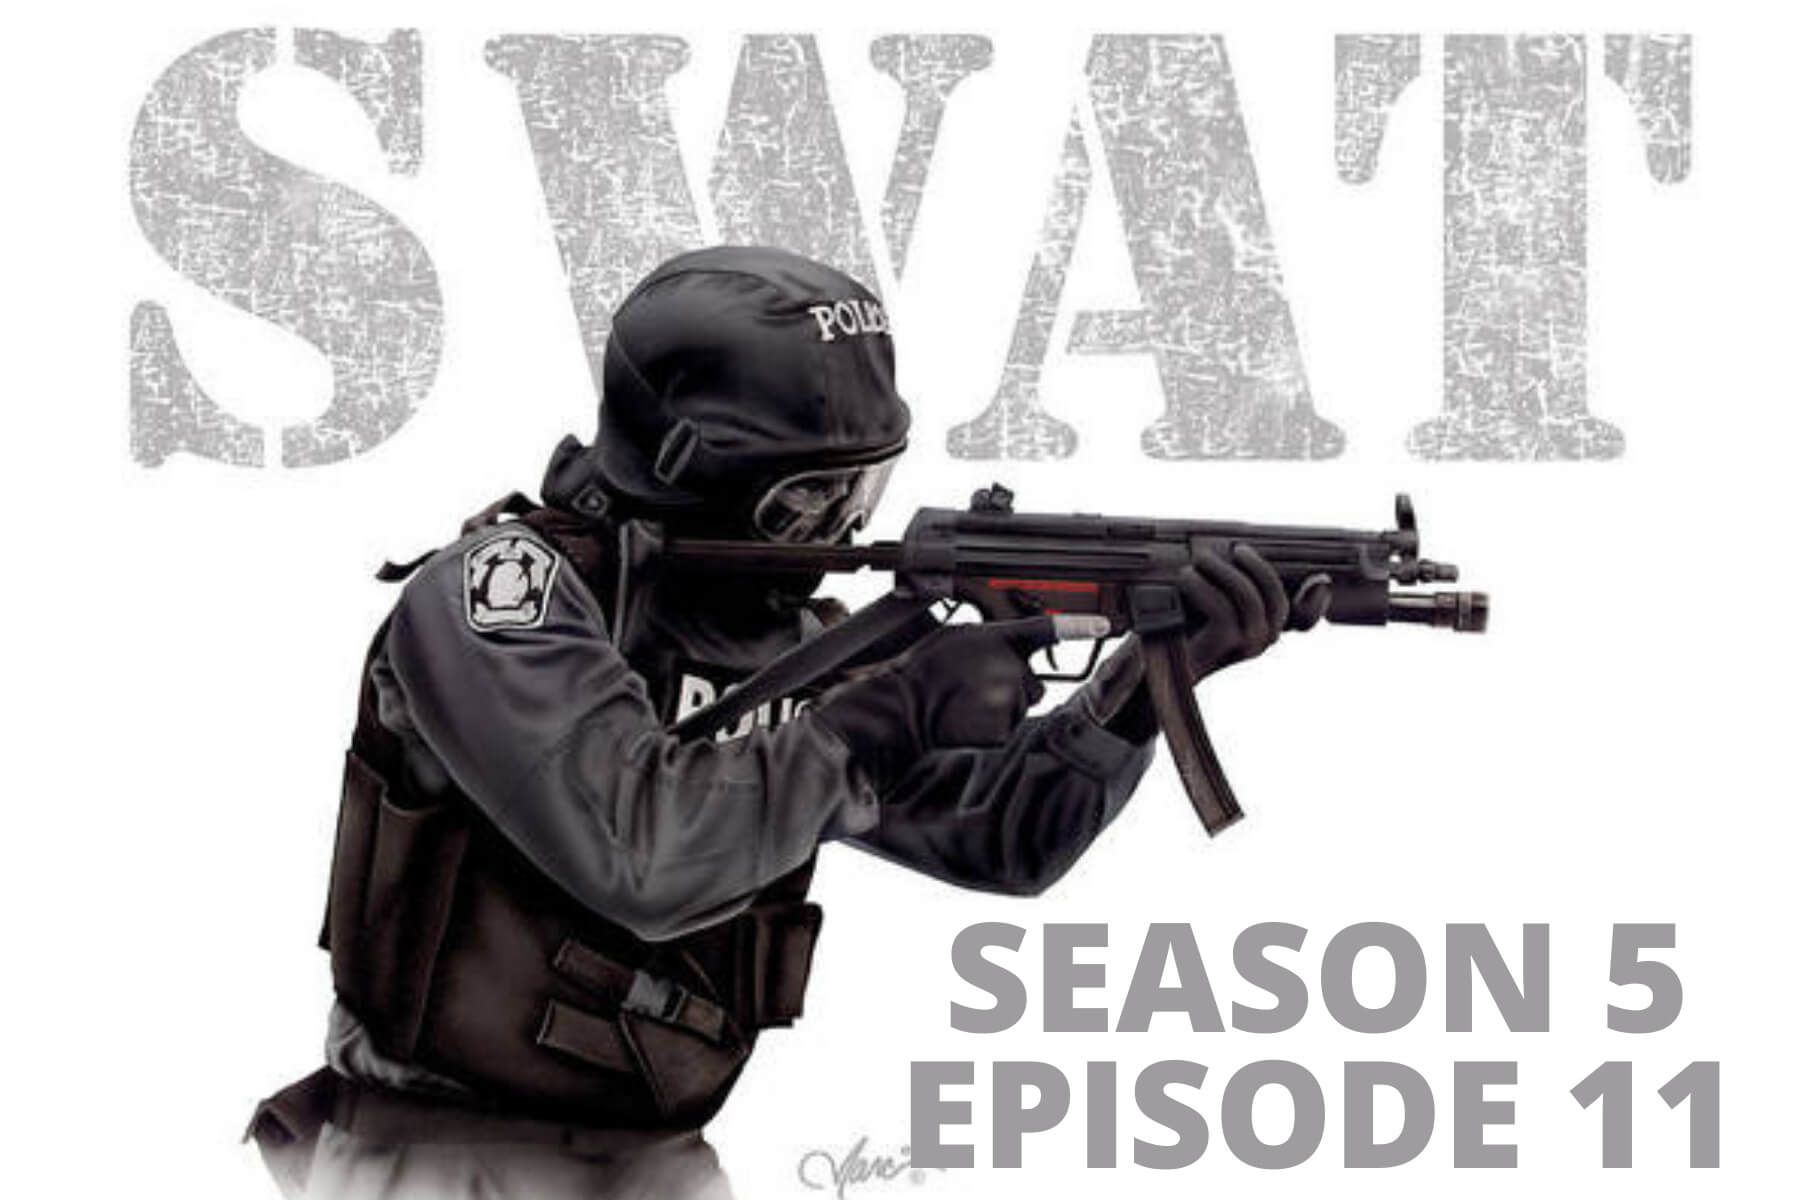 How many episodes are in the SWAT season 5?